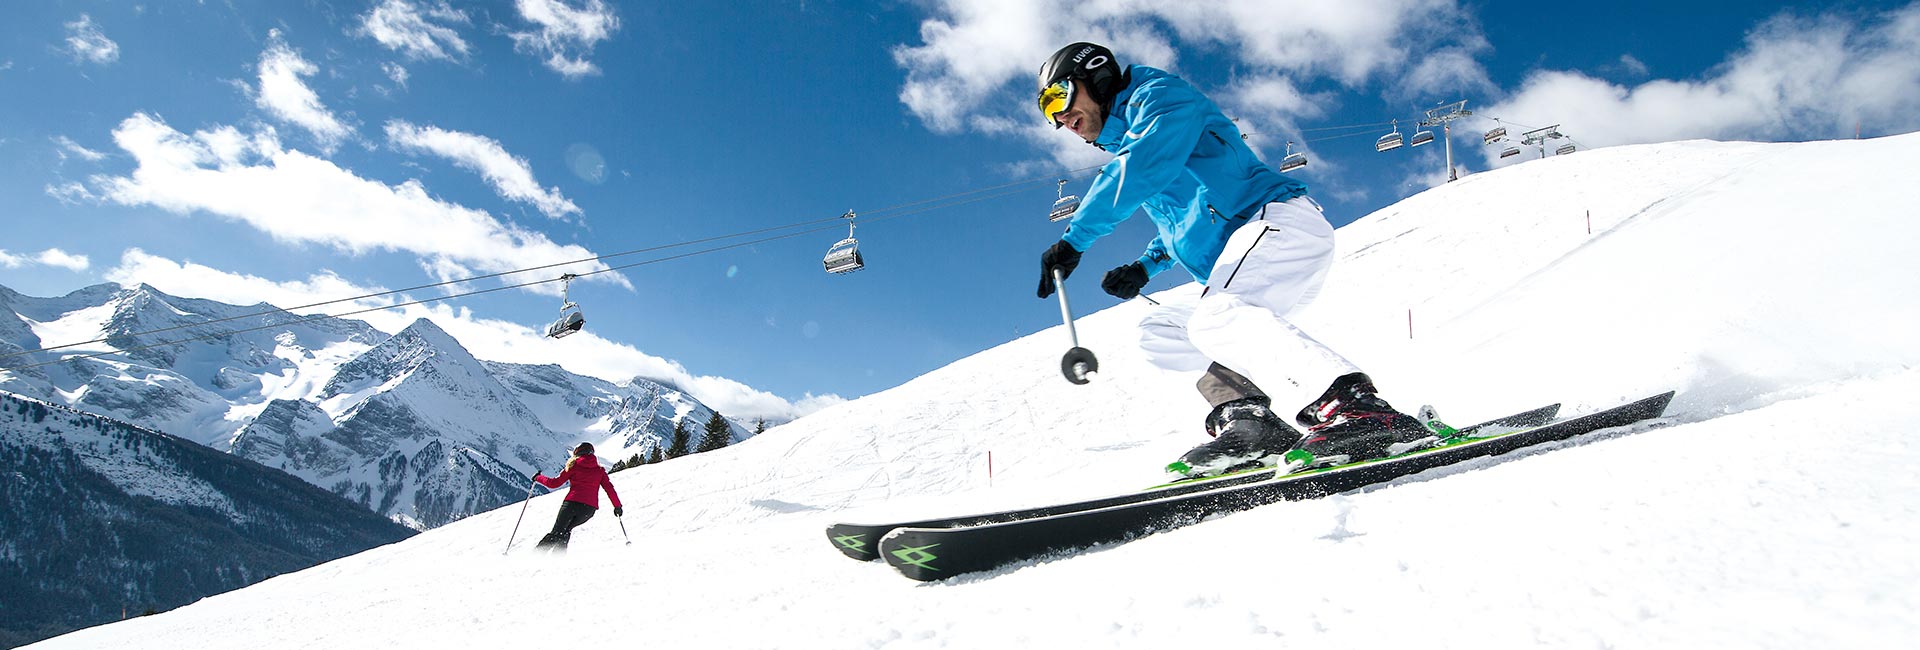 Eggalm - a Paradise for ambitious Skiers